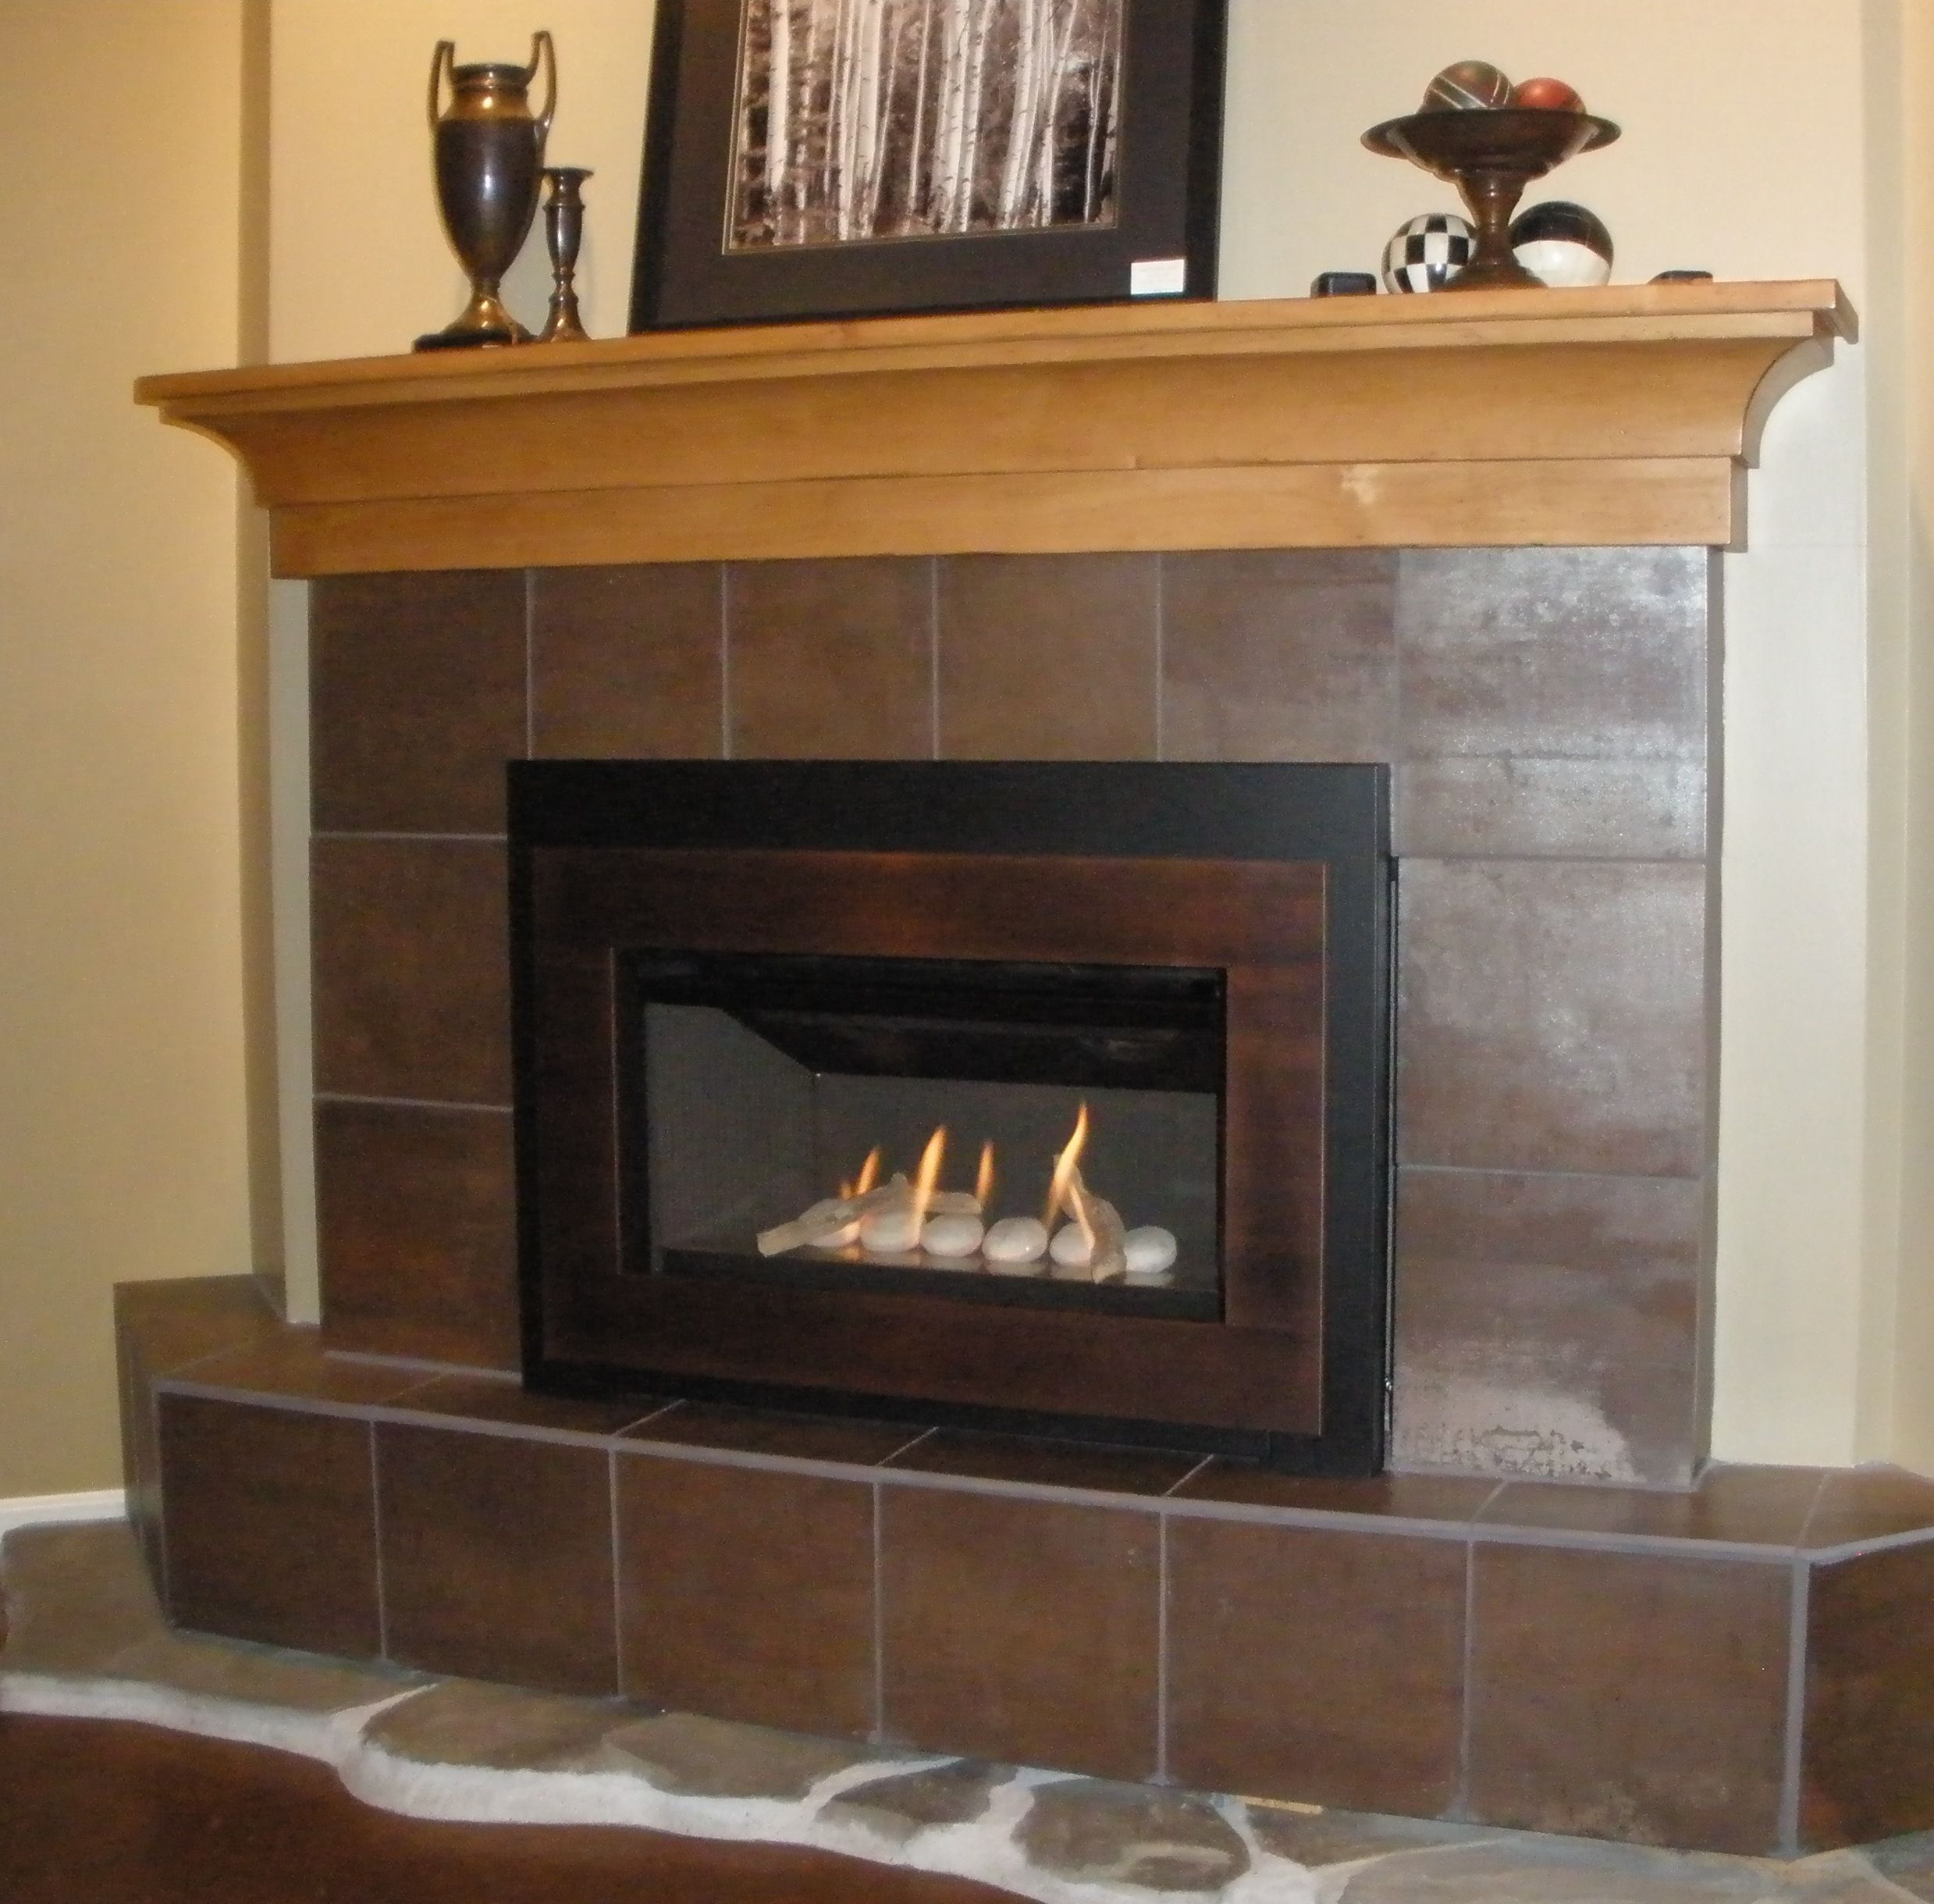 Linear Ventless Gas Fireplace Lovely Pin On Valor Radiant Gas Fireplaces Midwest Dealer